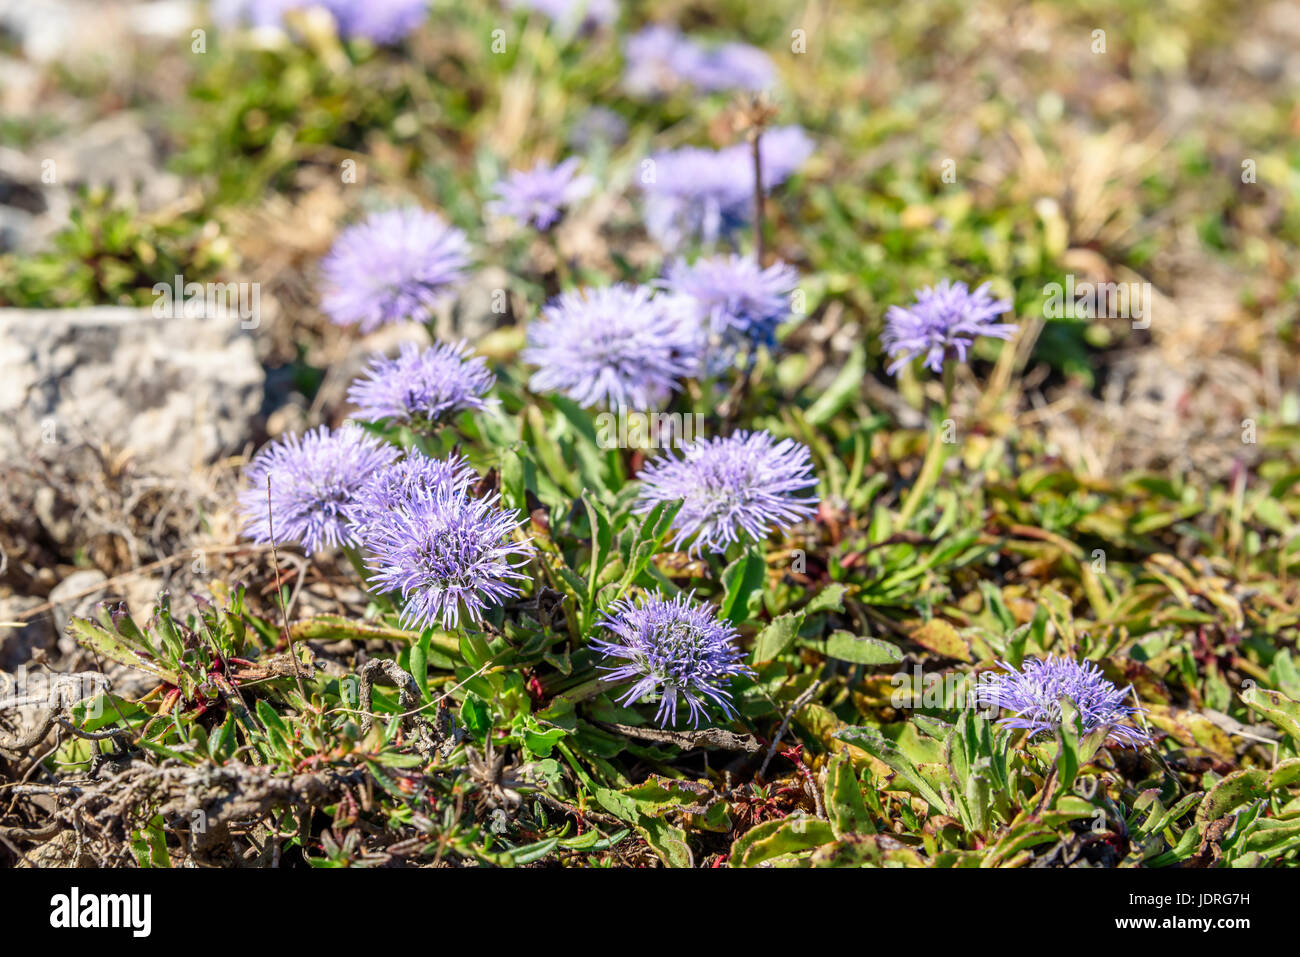 Globularia vulgaris, also known as common blue daisy or common globe daisy, here growing wild on limestone rich soil. Location Oland, Sweden. Stock Photo